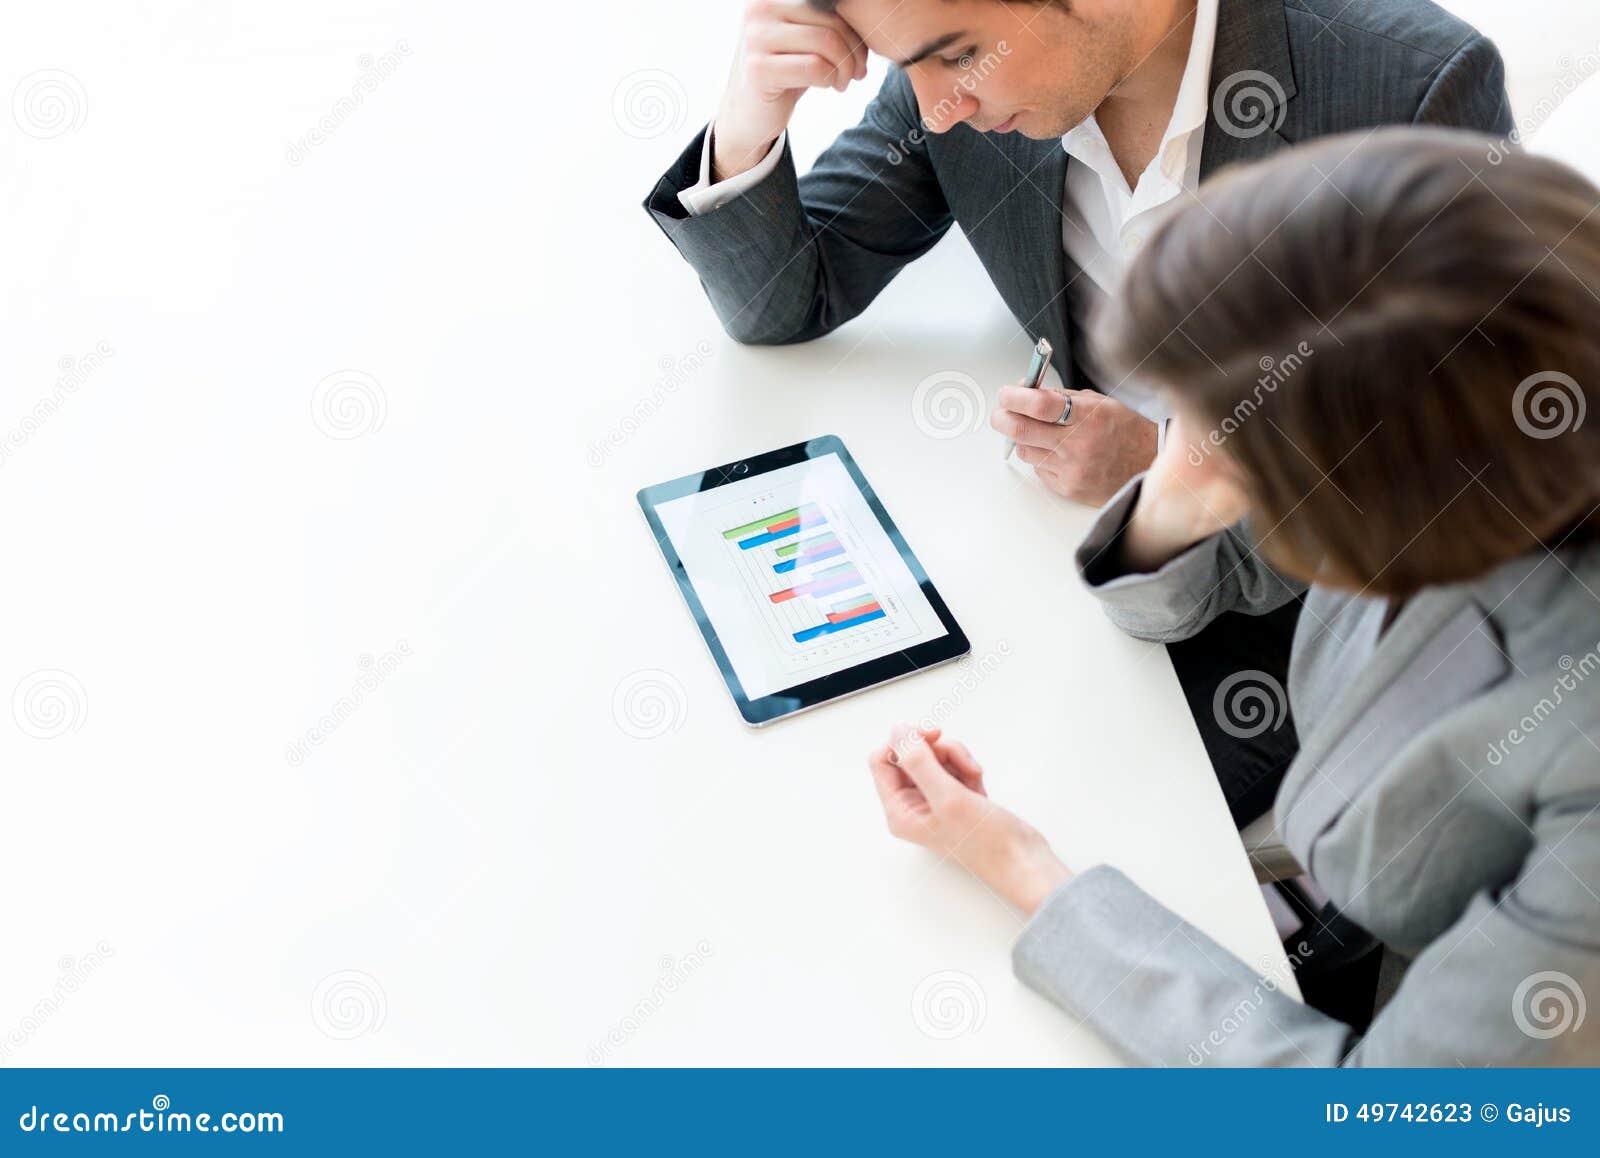 business colleagues analysing a graph